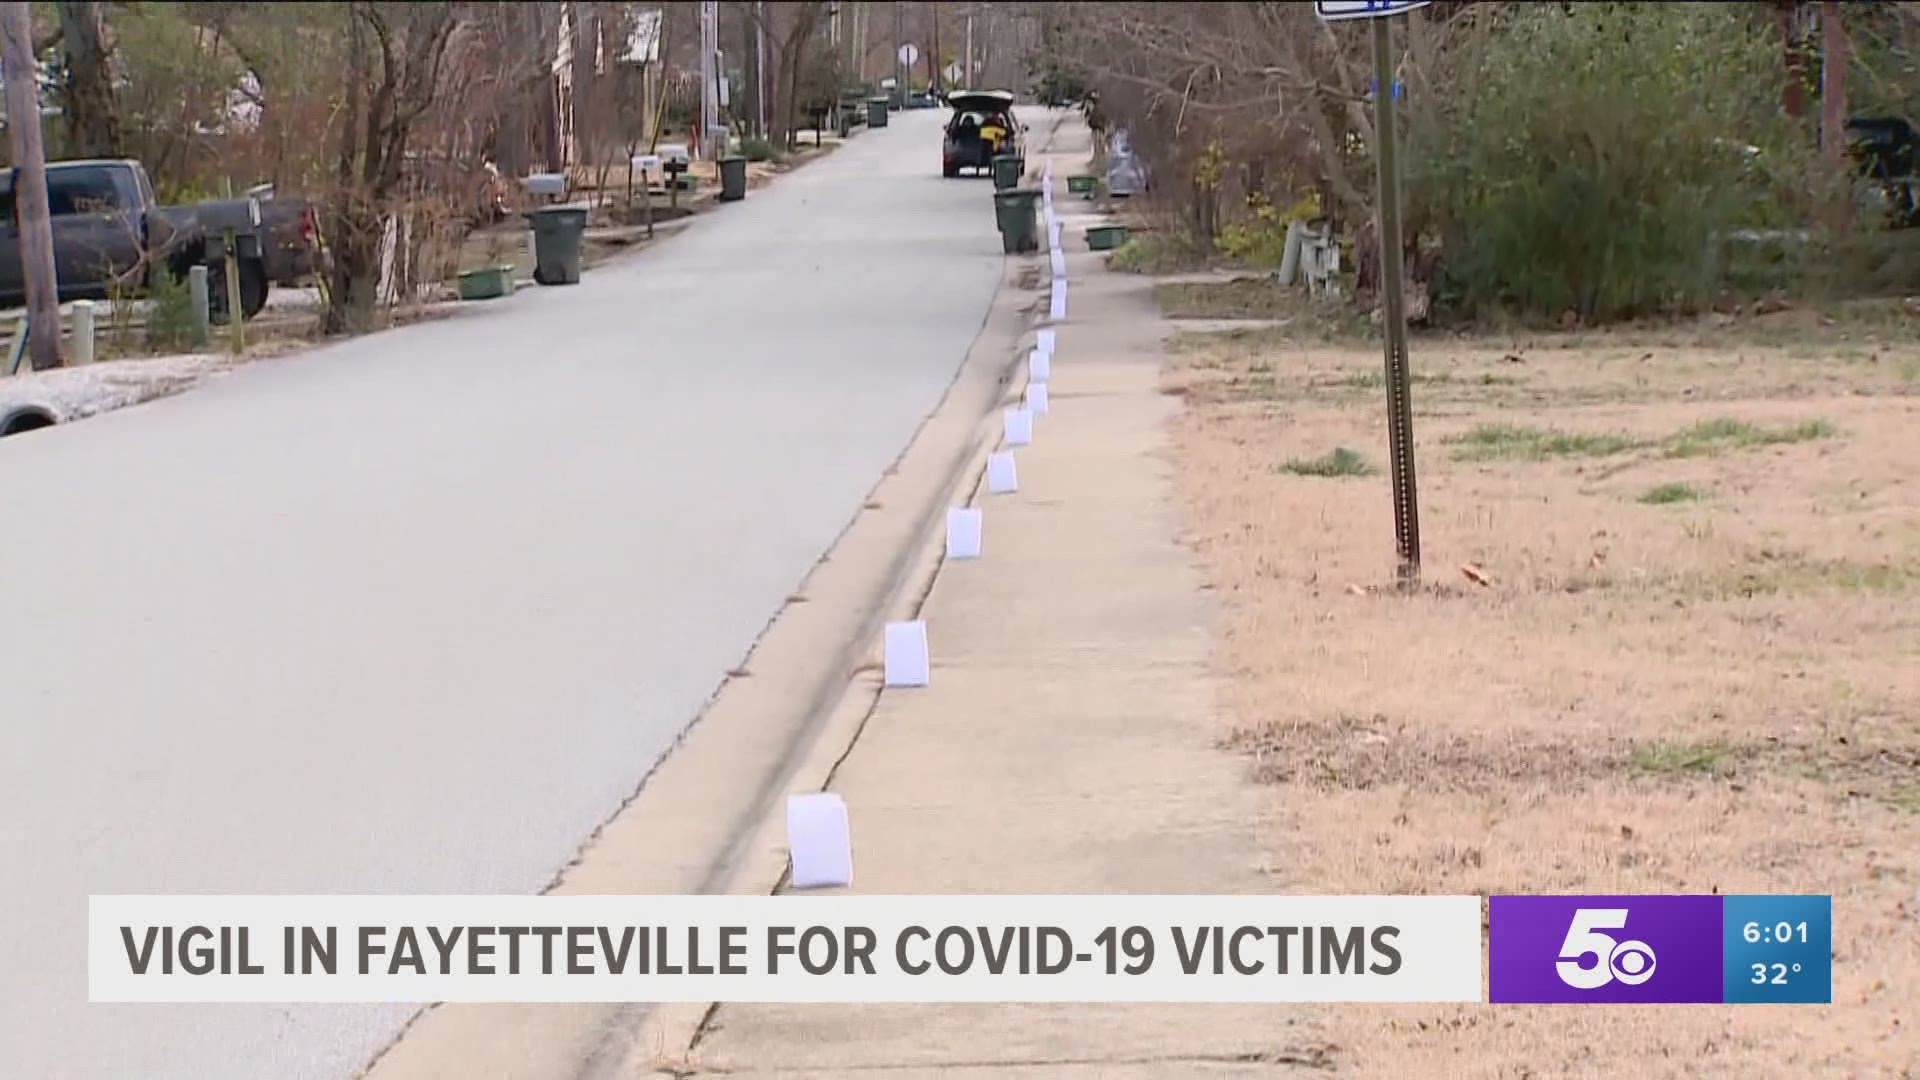 Organizers hope to put into perspective how many lives have been lost to COVID-19 in Washington County alone. https://bit.ly/2WGhwxb